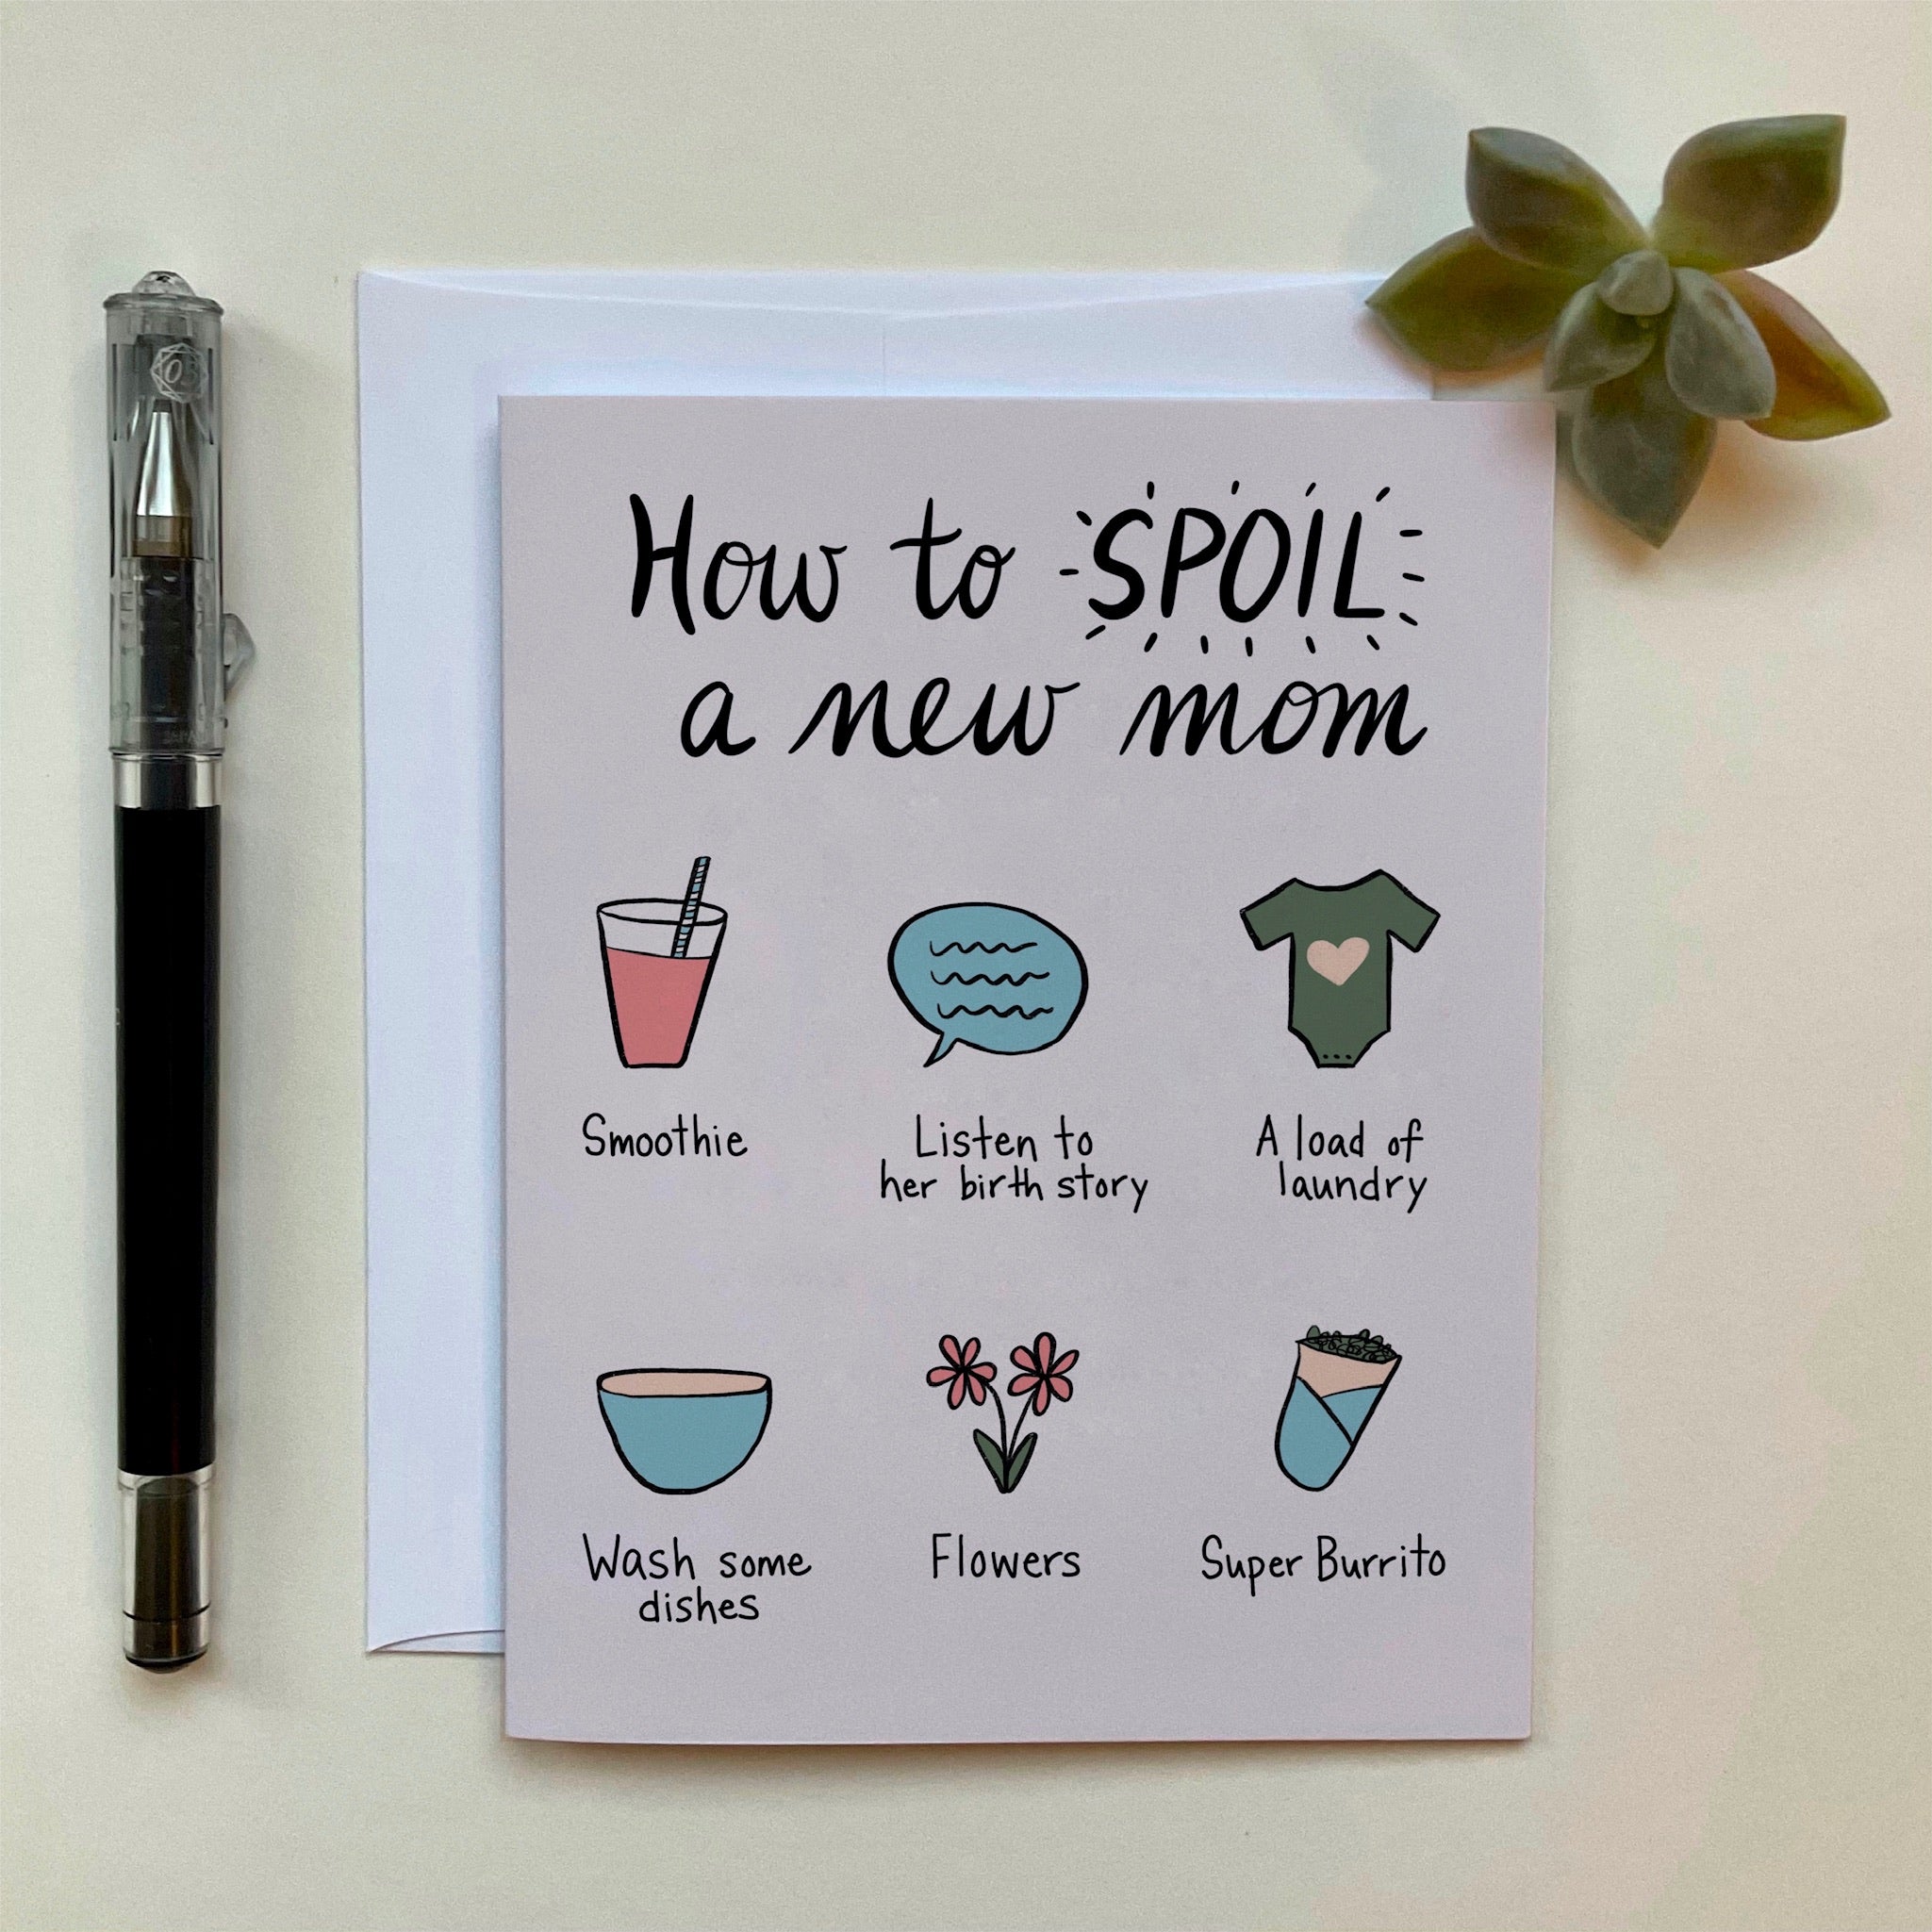 How to Spoil a New Mom